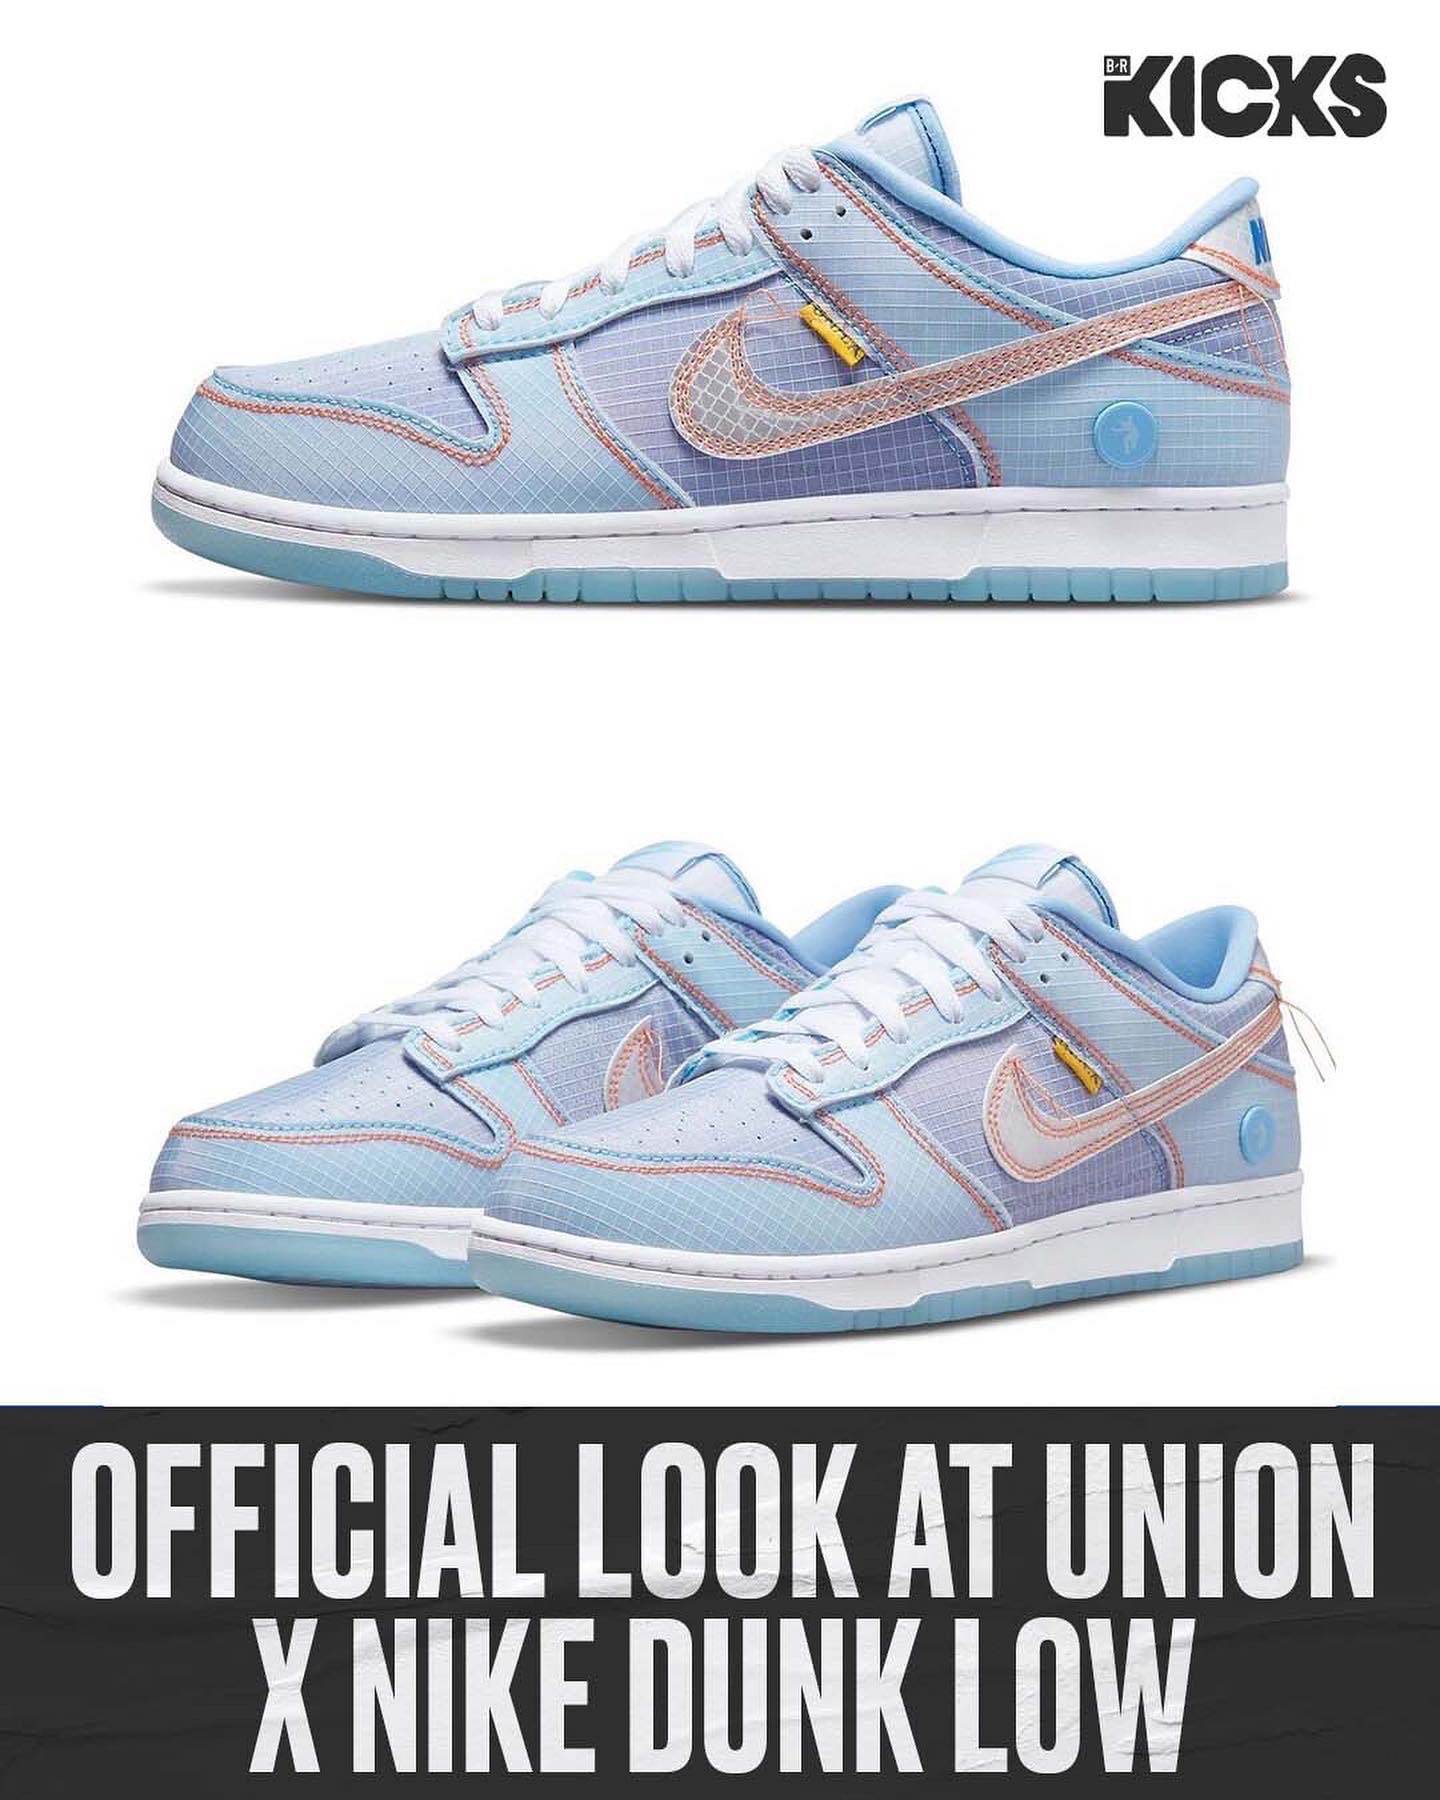 Kicks a Twitter: "Union has a Nike Dunk Low collaboration dropping soon https://t.co/dby34MsAdm" Twitter